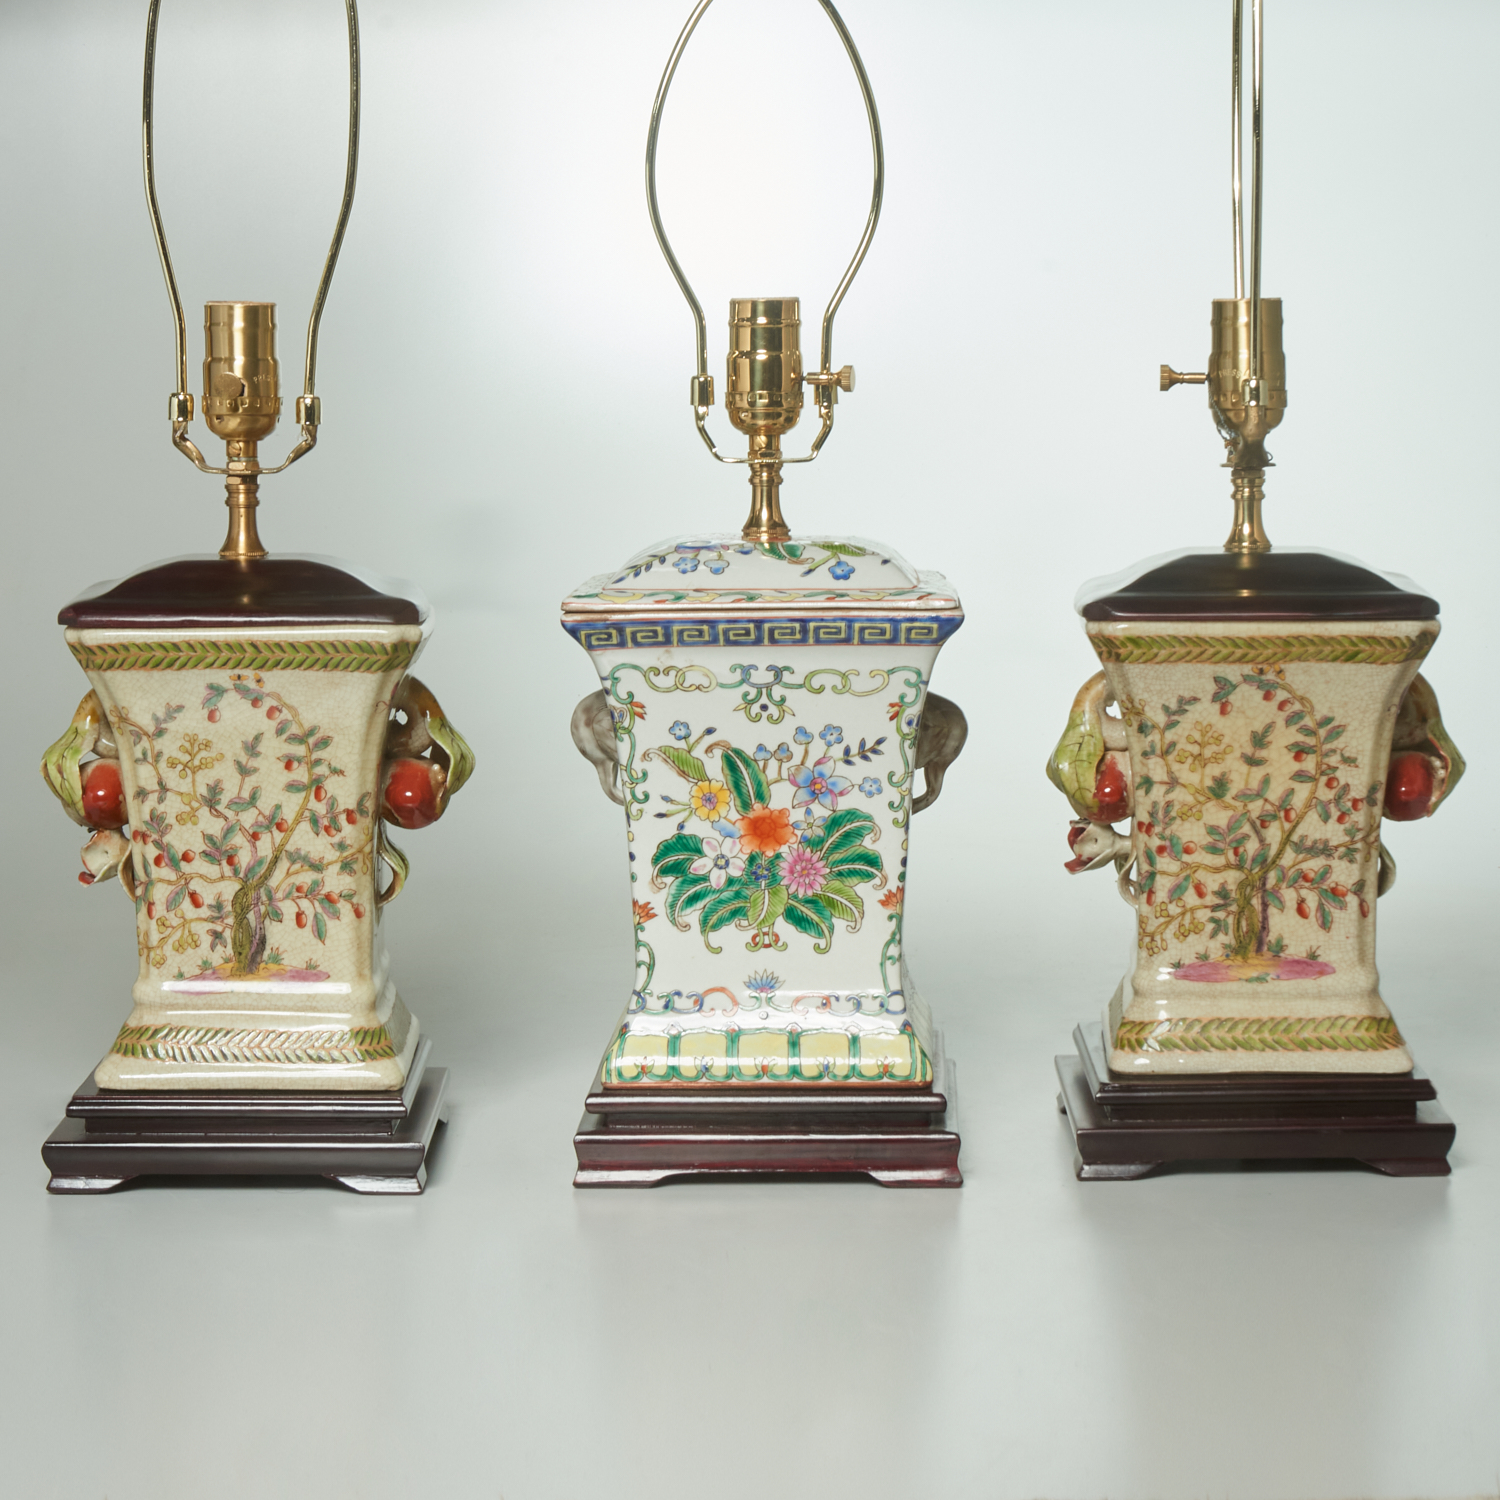  3 CHINESE PORCELAIN TABLE LAMPS 36180b